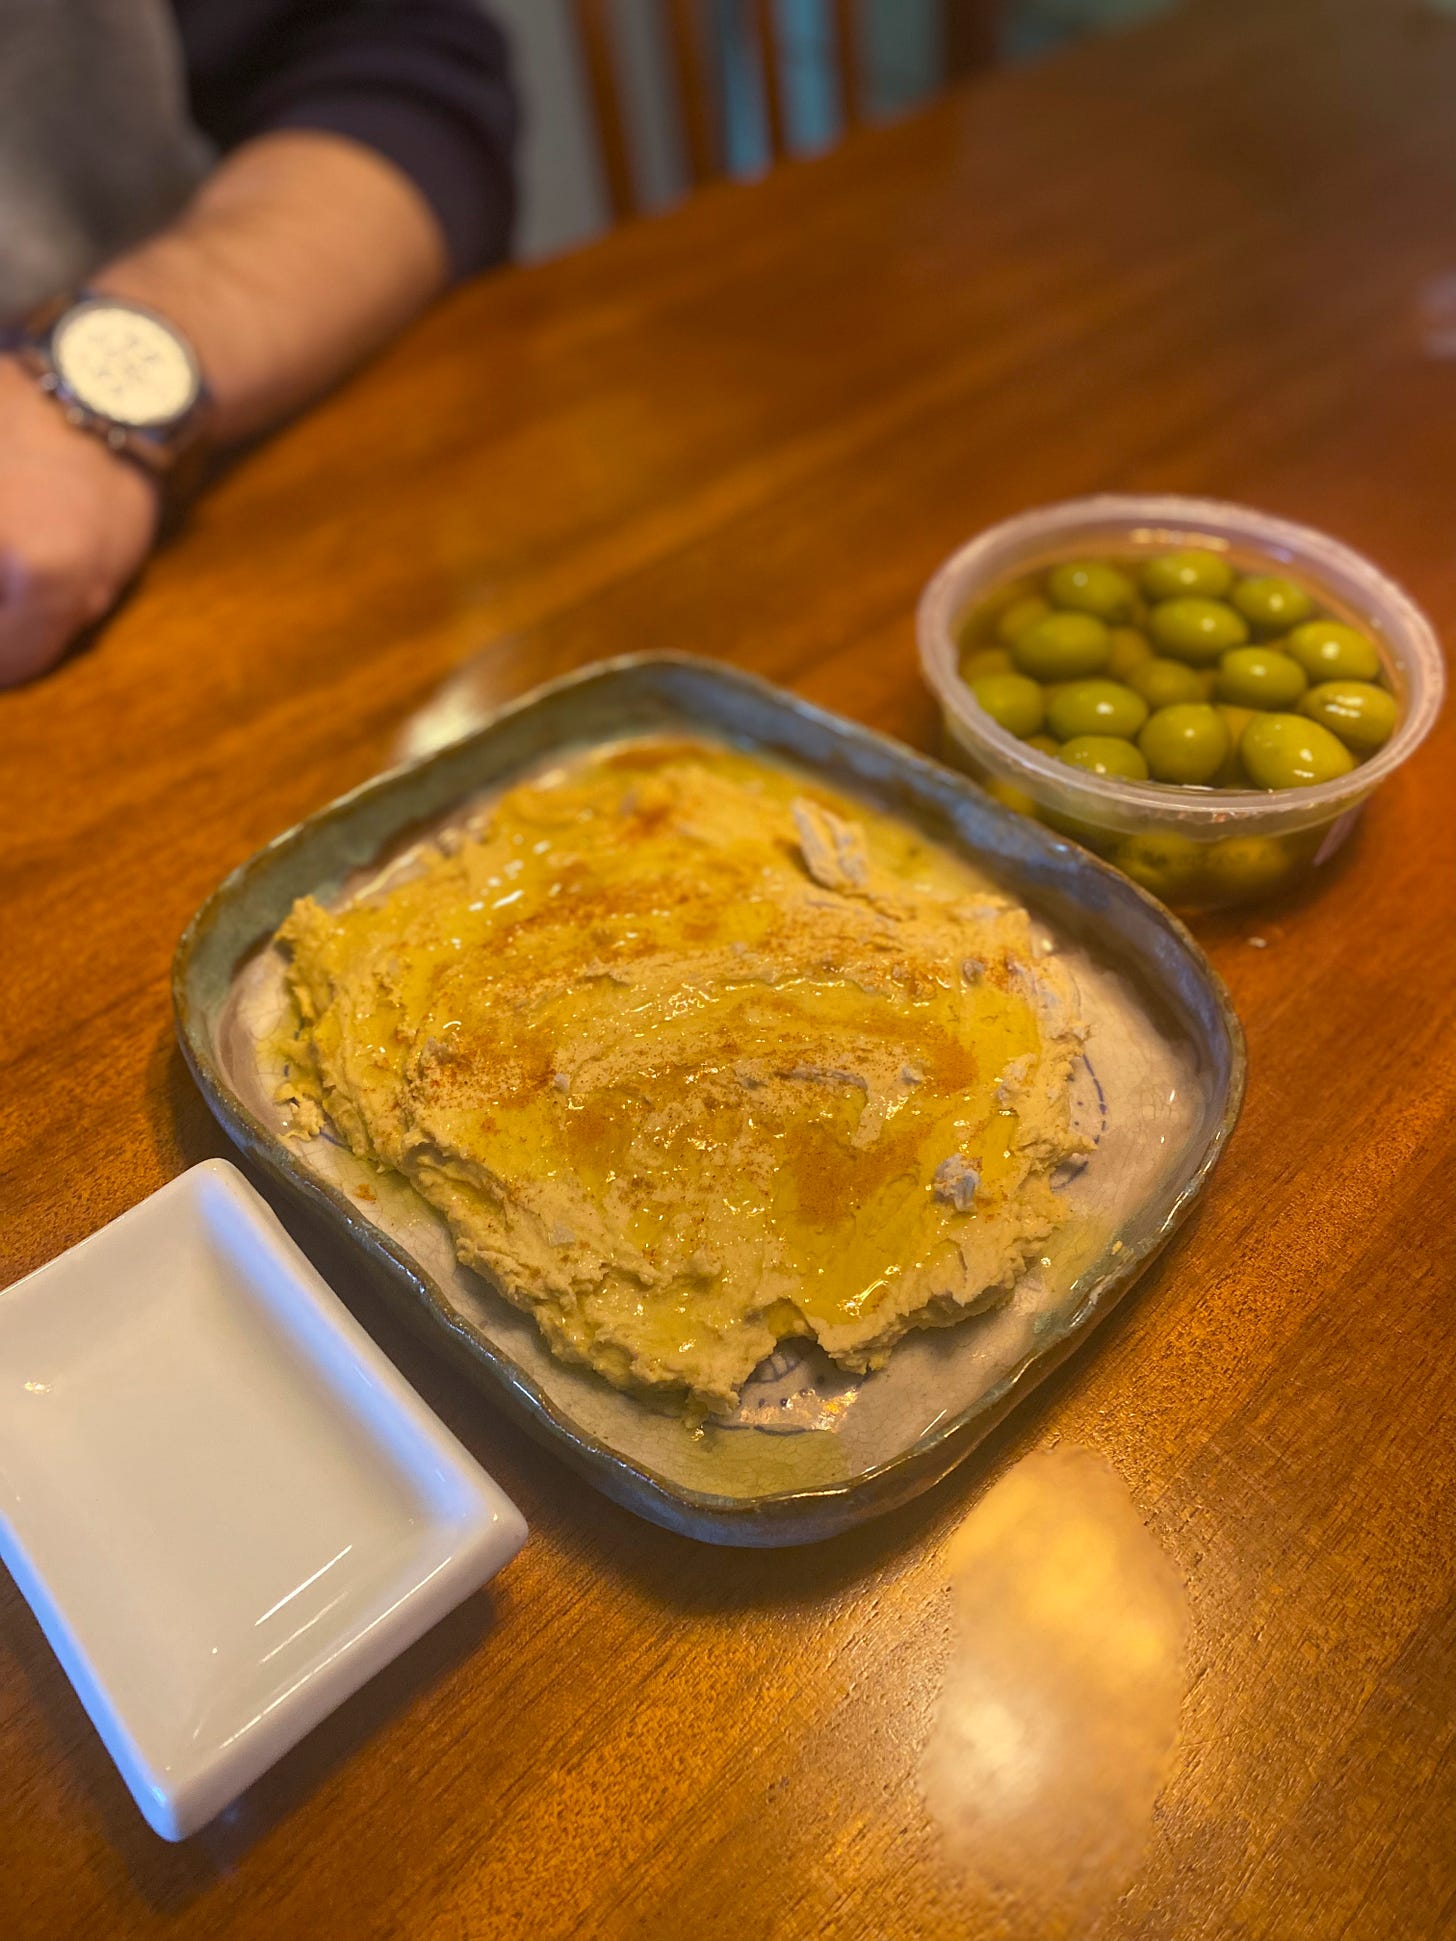 A squarish handmade dish spread with hummus that is covered with olive oil and paprika. On one side of the dish is a container of castelvetrano olives, and on the other side is a small white dish for the pits.